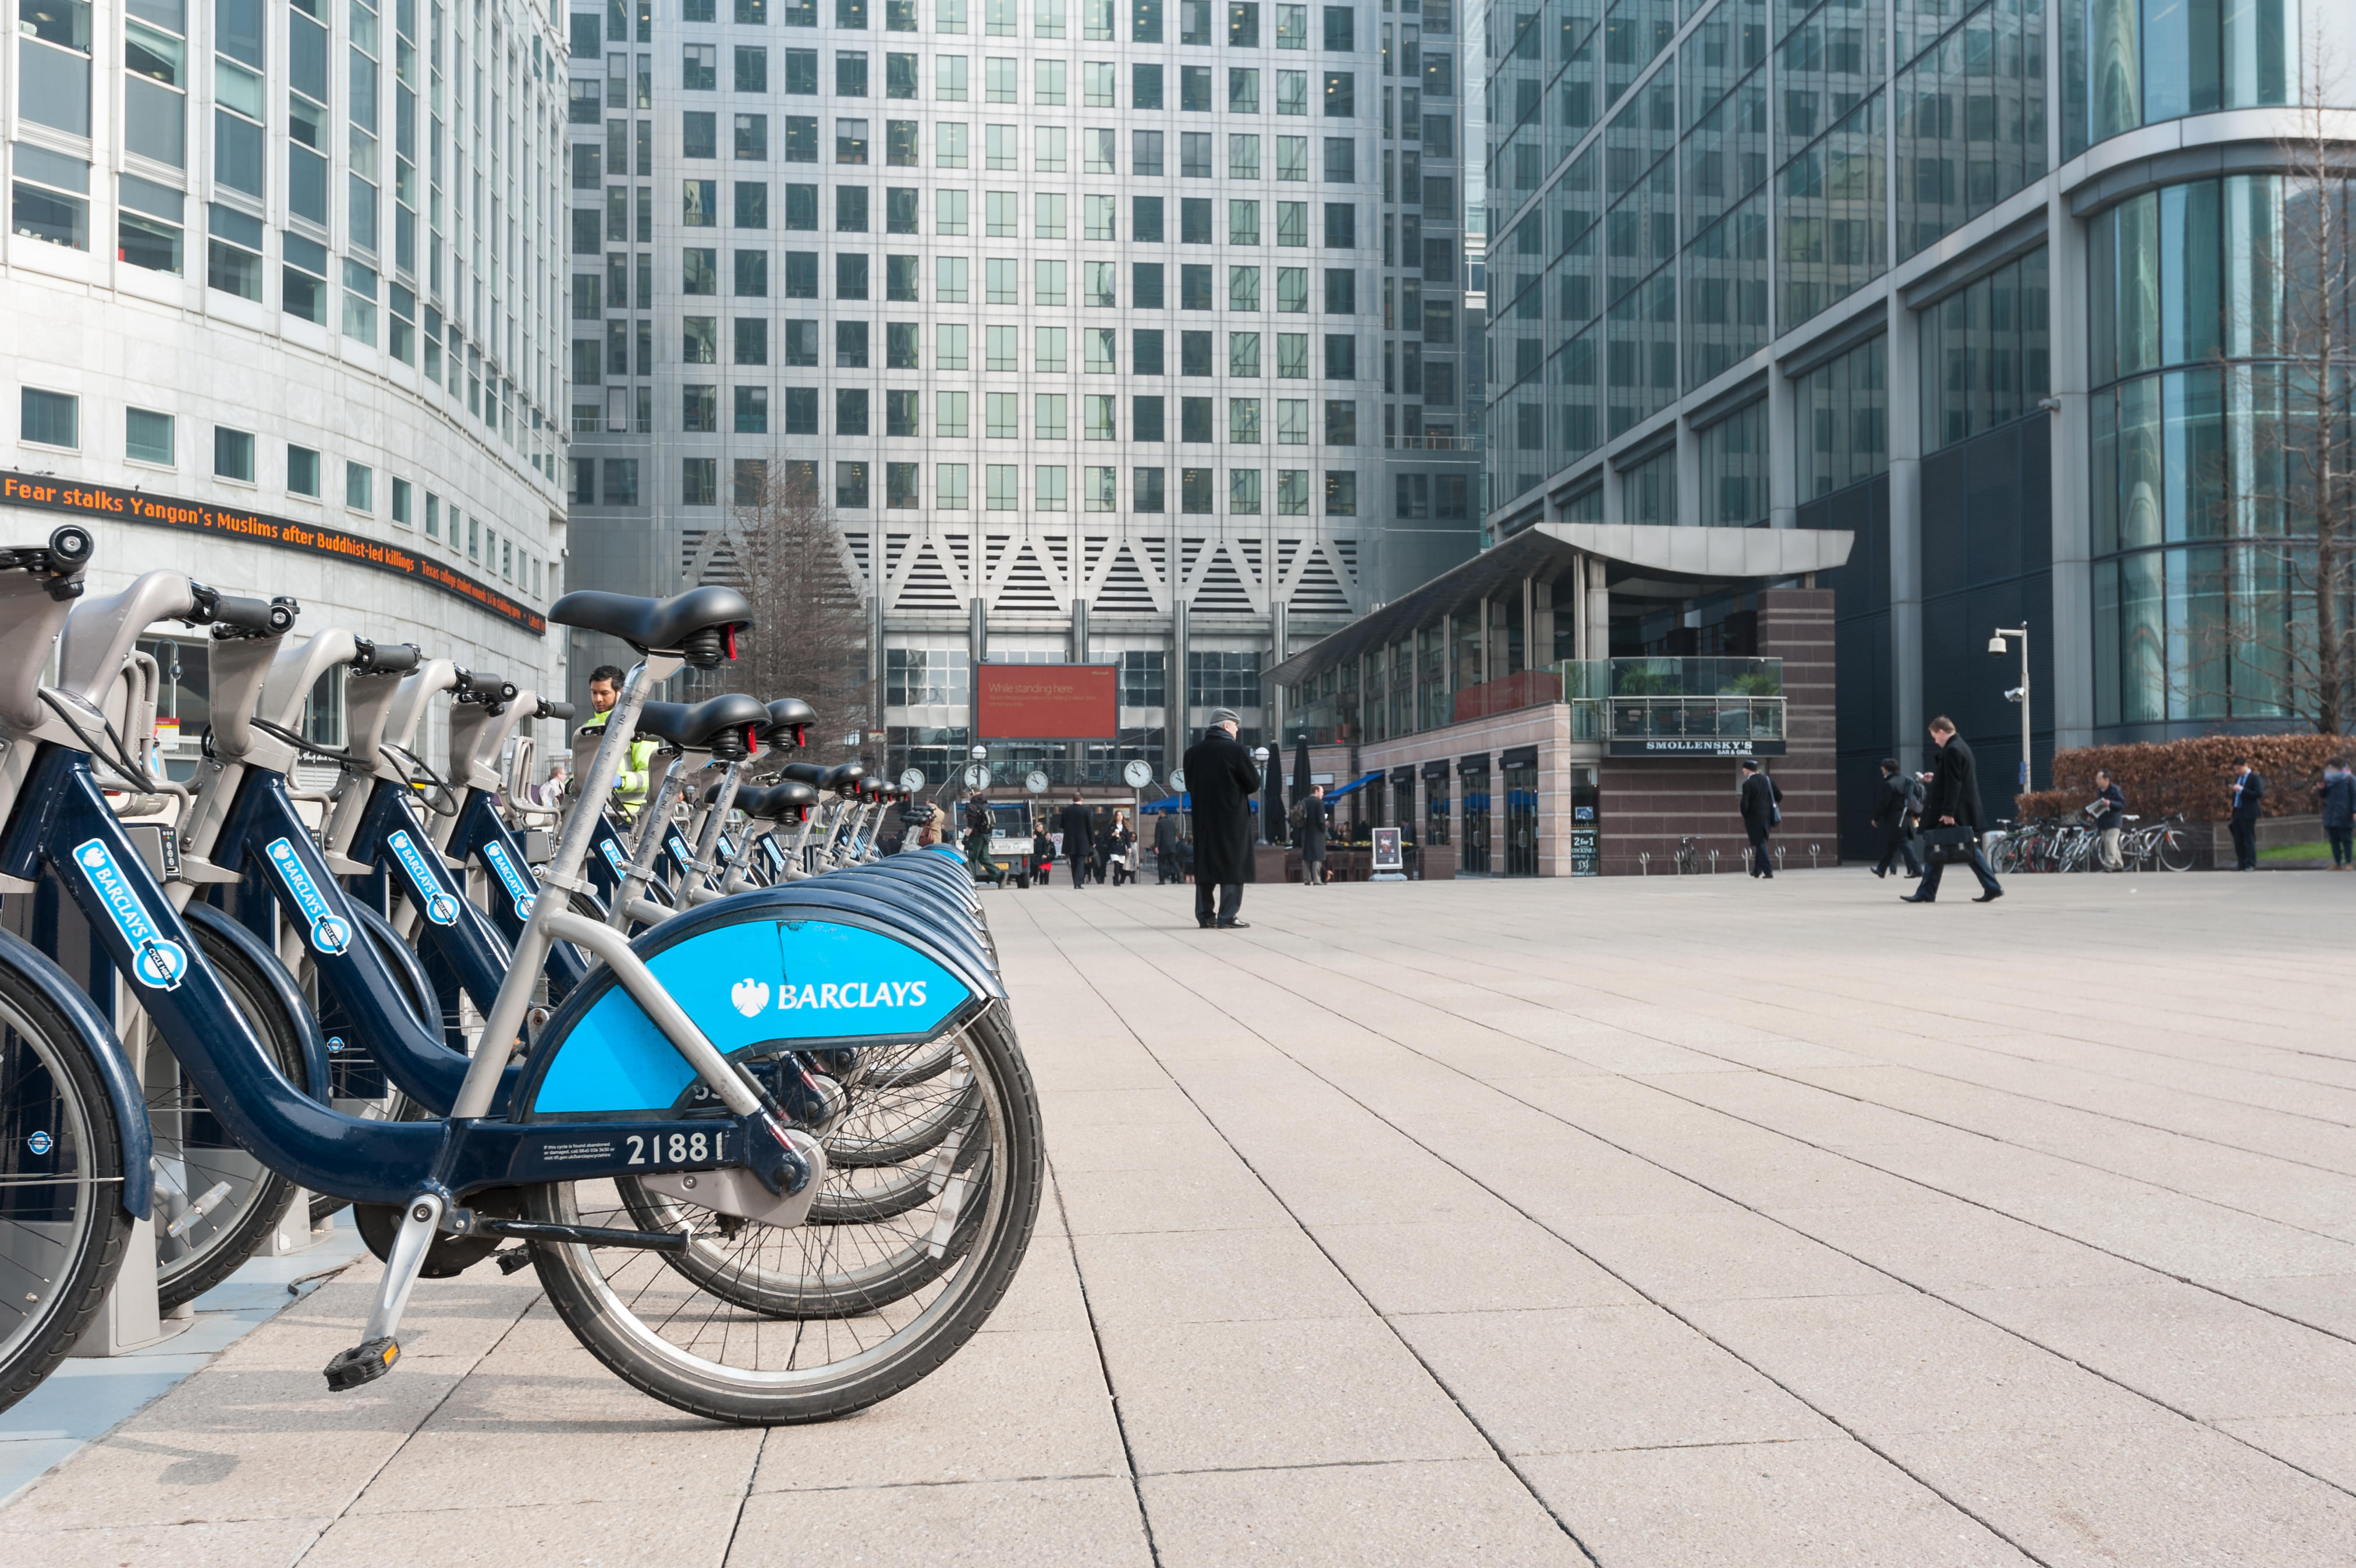 Barclays Cycle Hire: